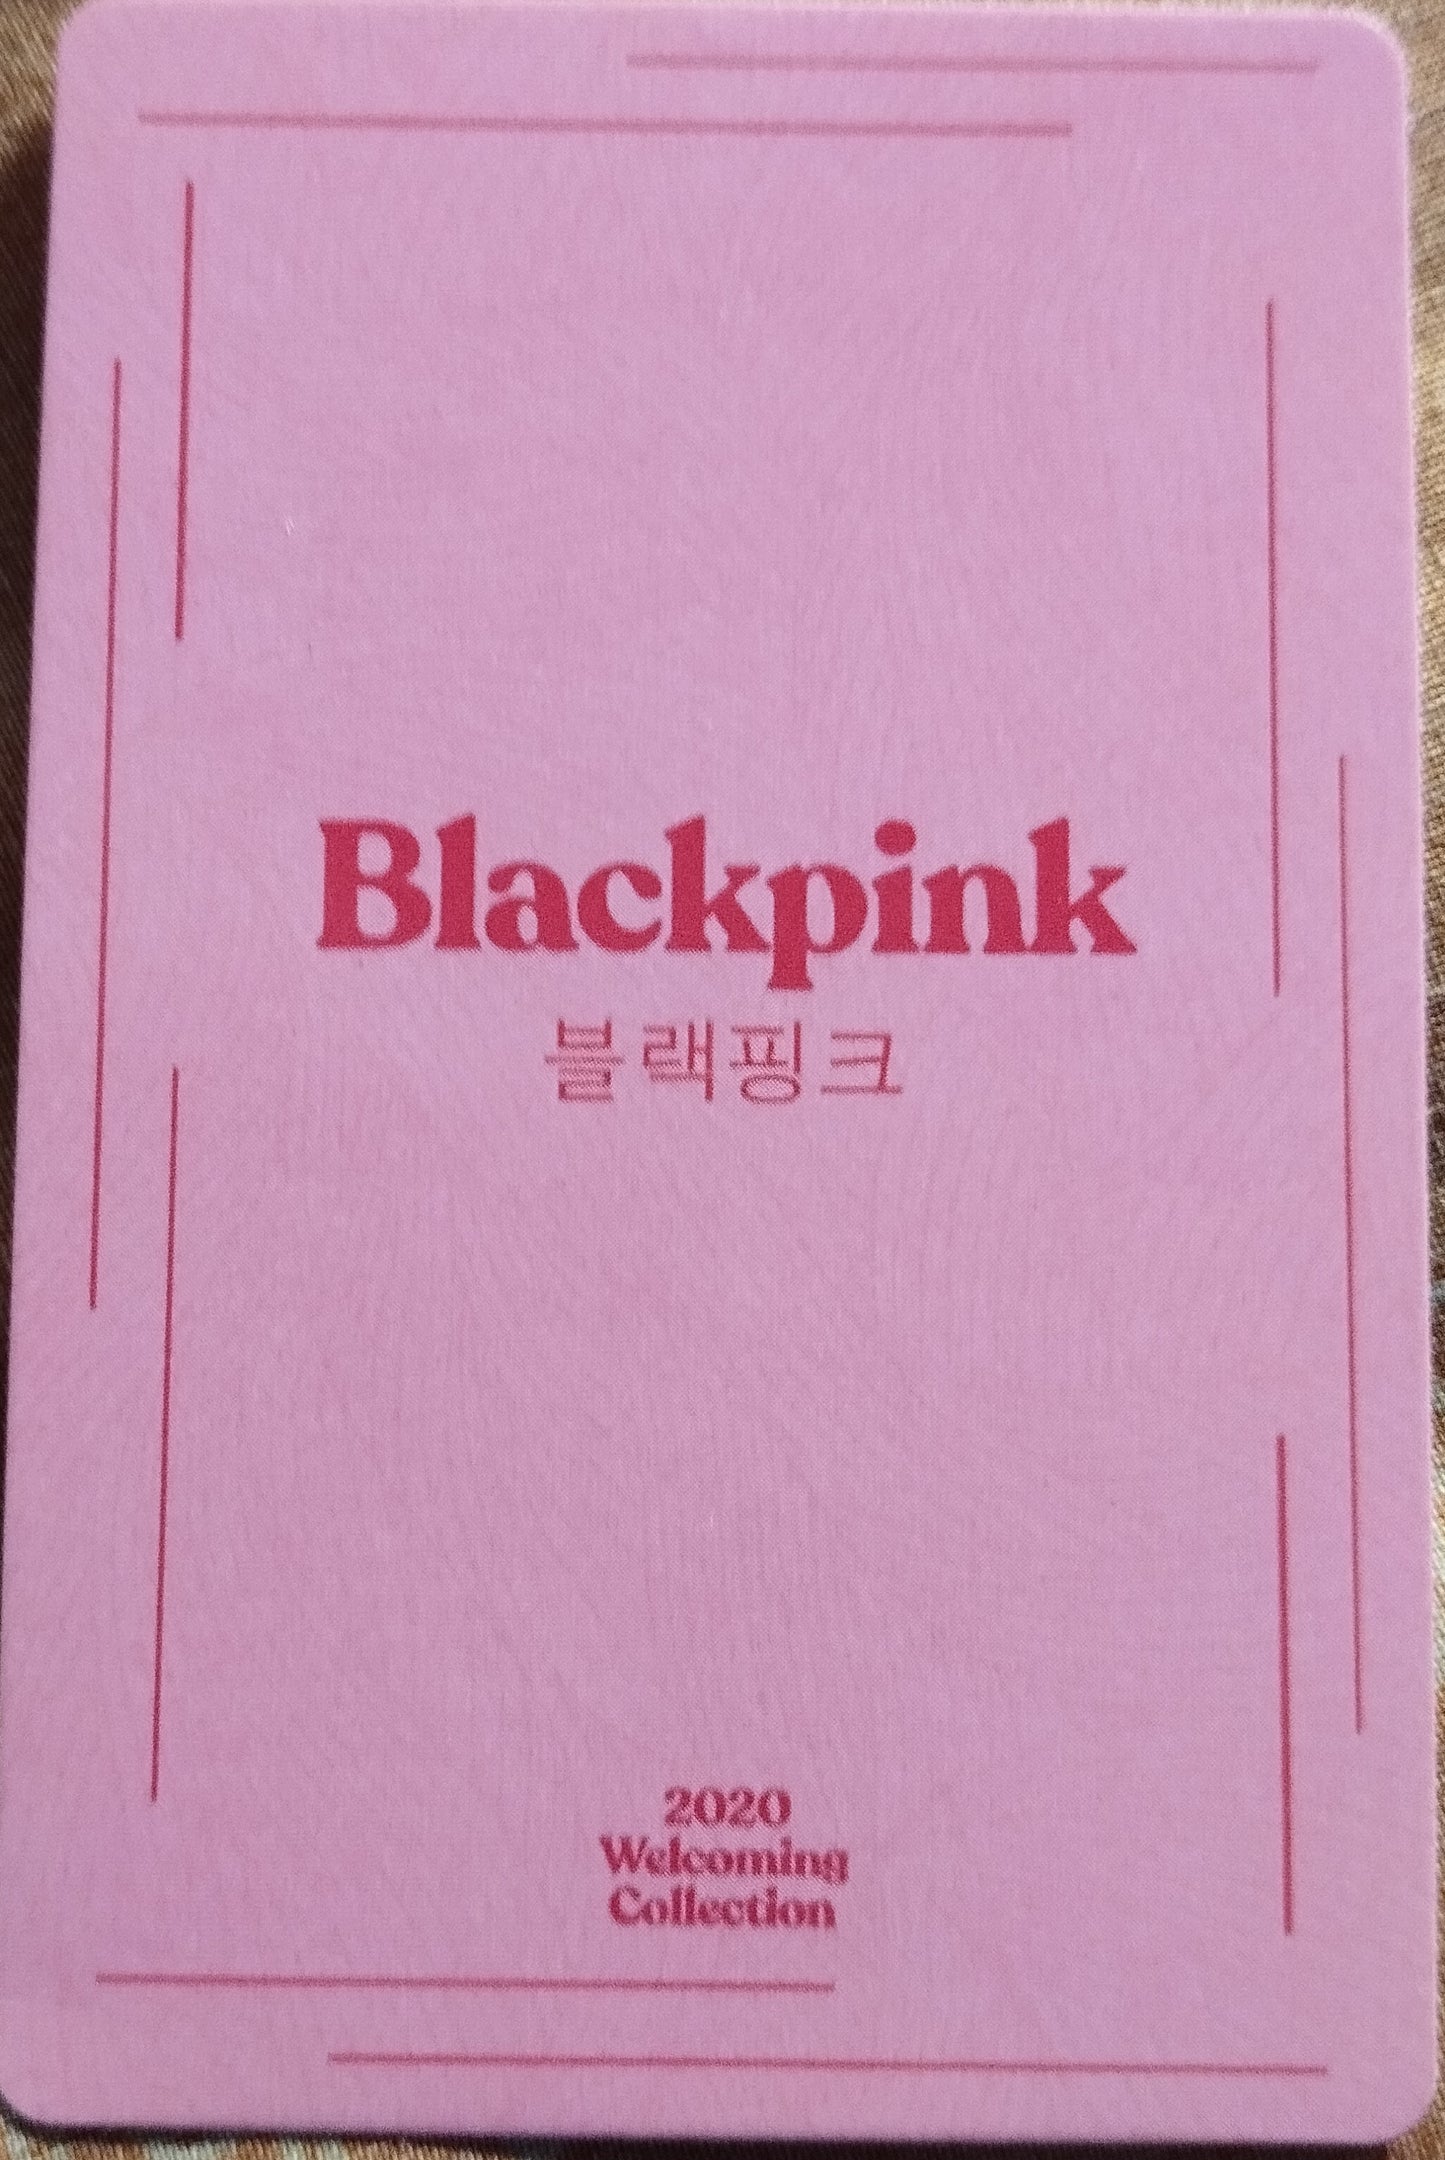 Photocard  BLACKPINK  2020 welcoming collection  Rose  Jennie